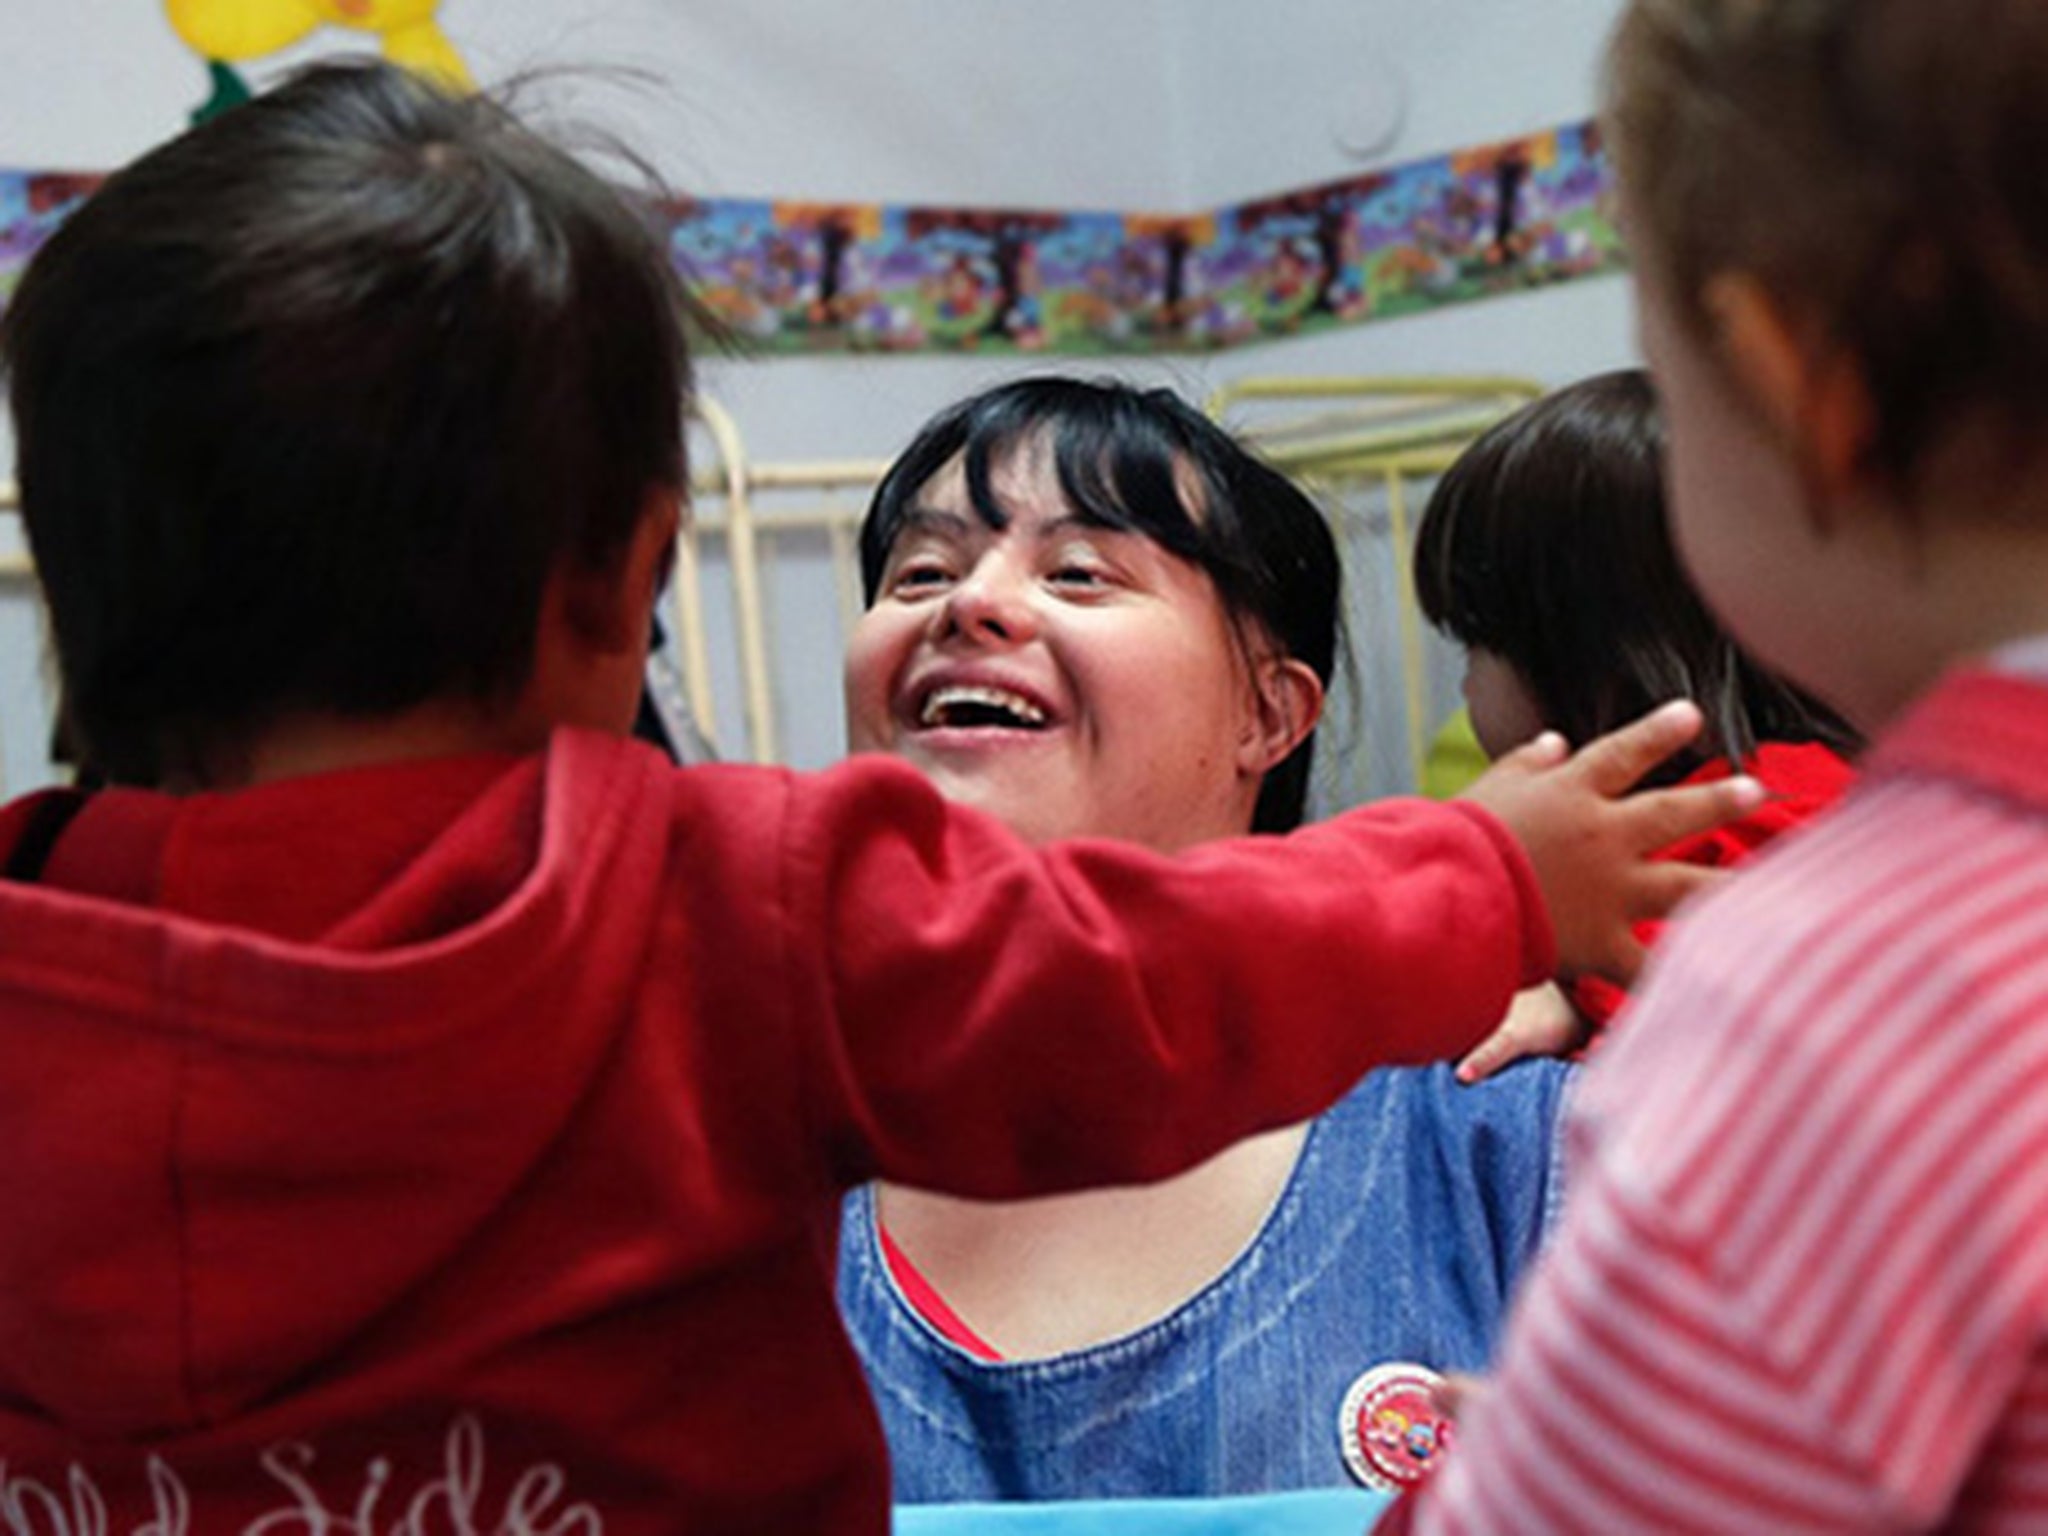 Noelia Garella, a nursery school teacher born with Down syndrome, plays with children at the Jeromito kindergarten in Cordoba, Argentina